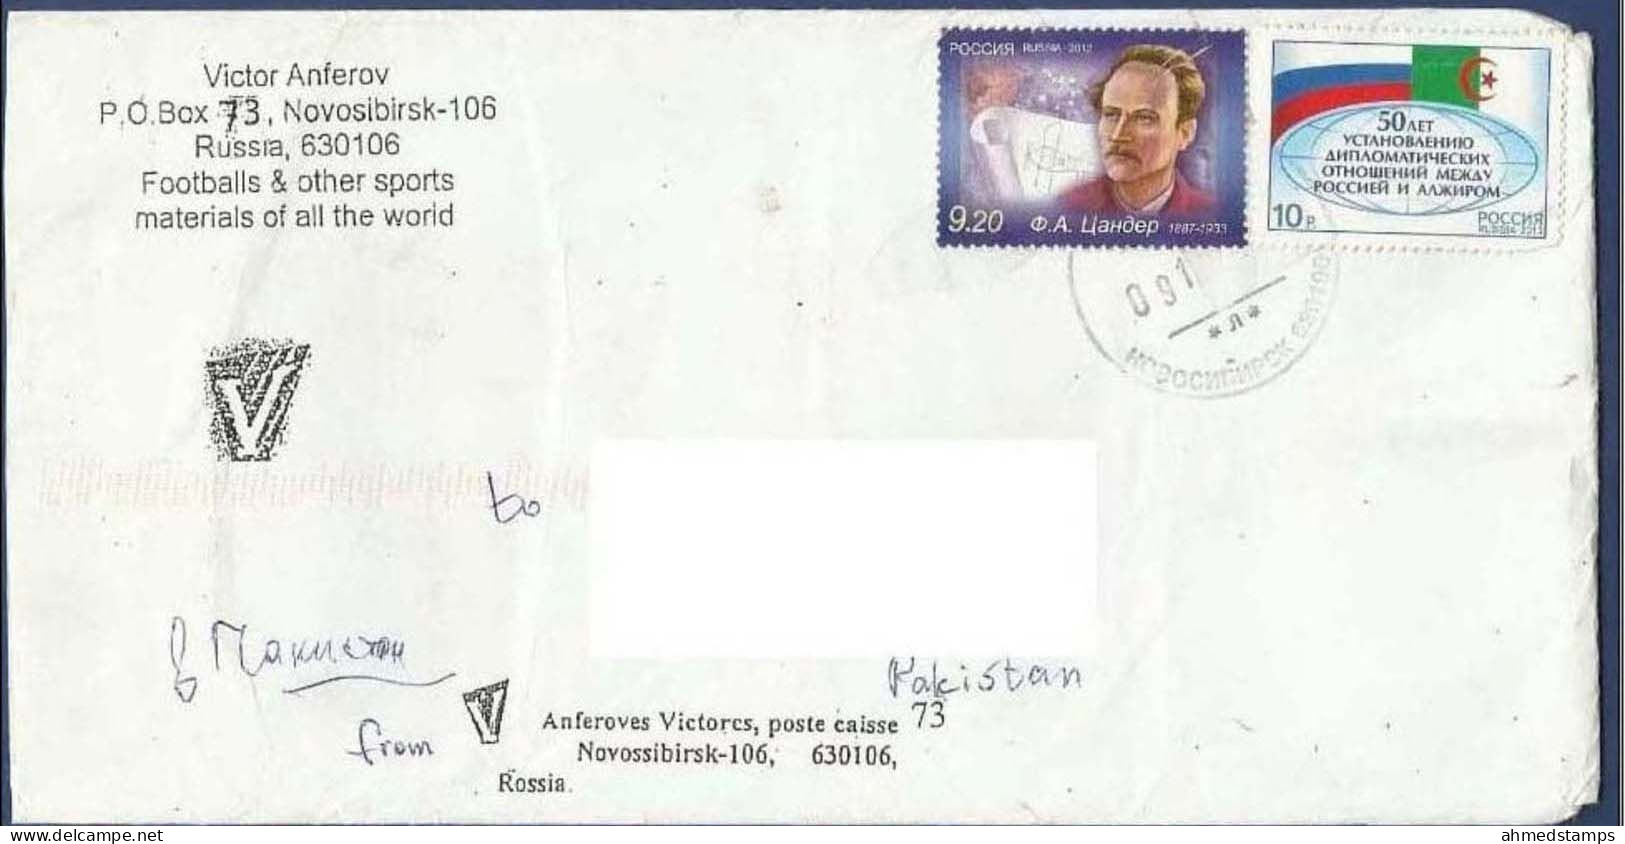 RUSSIA POSTAL USED AIRMAIL COVER TO PAKISTAN - Luftpost